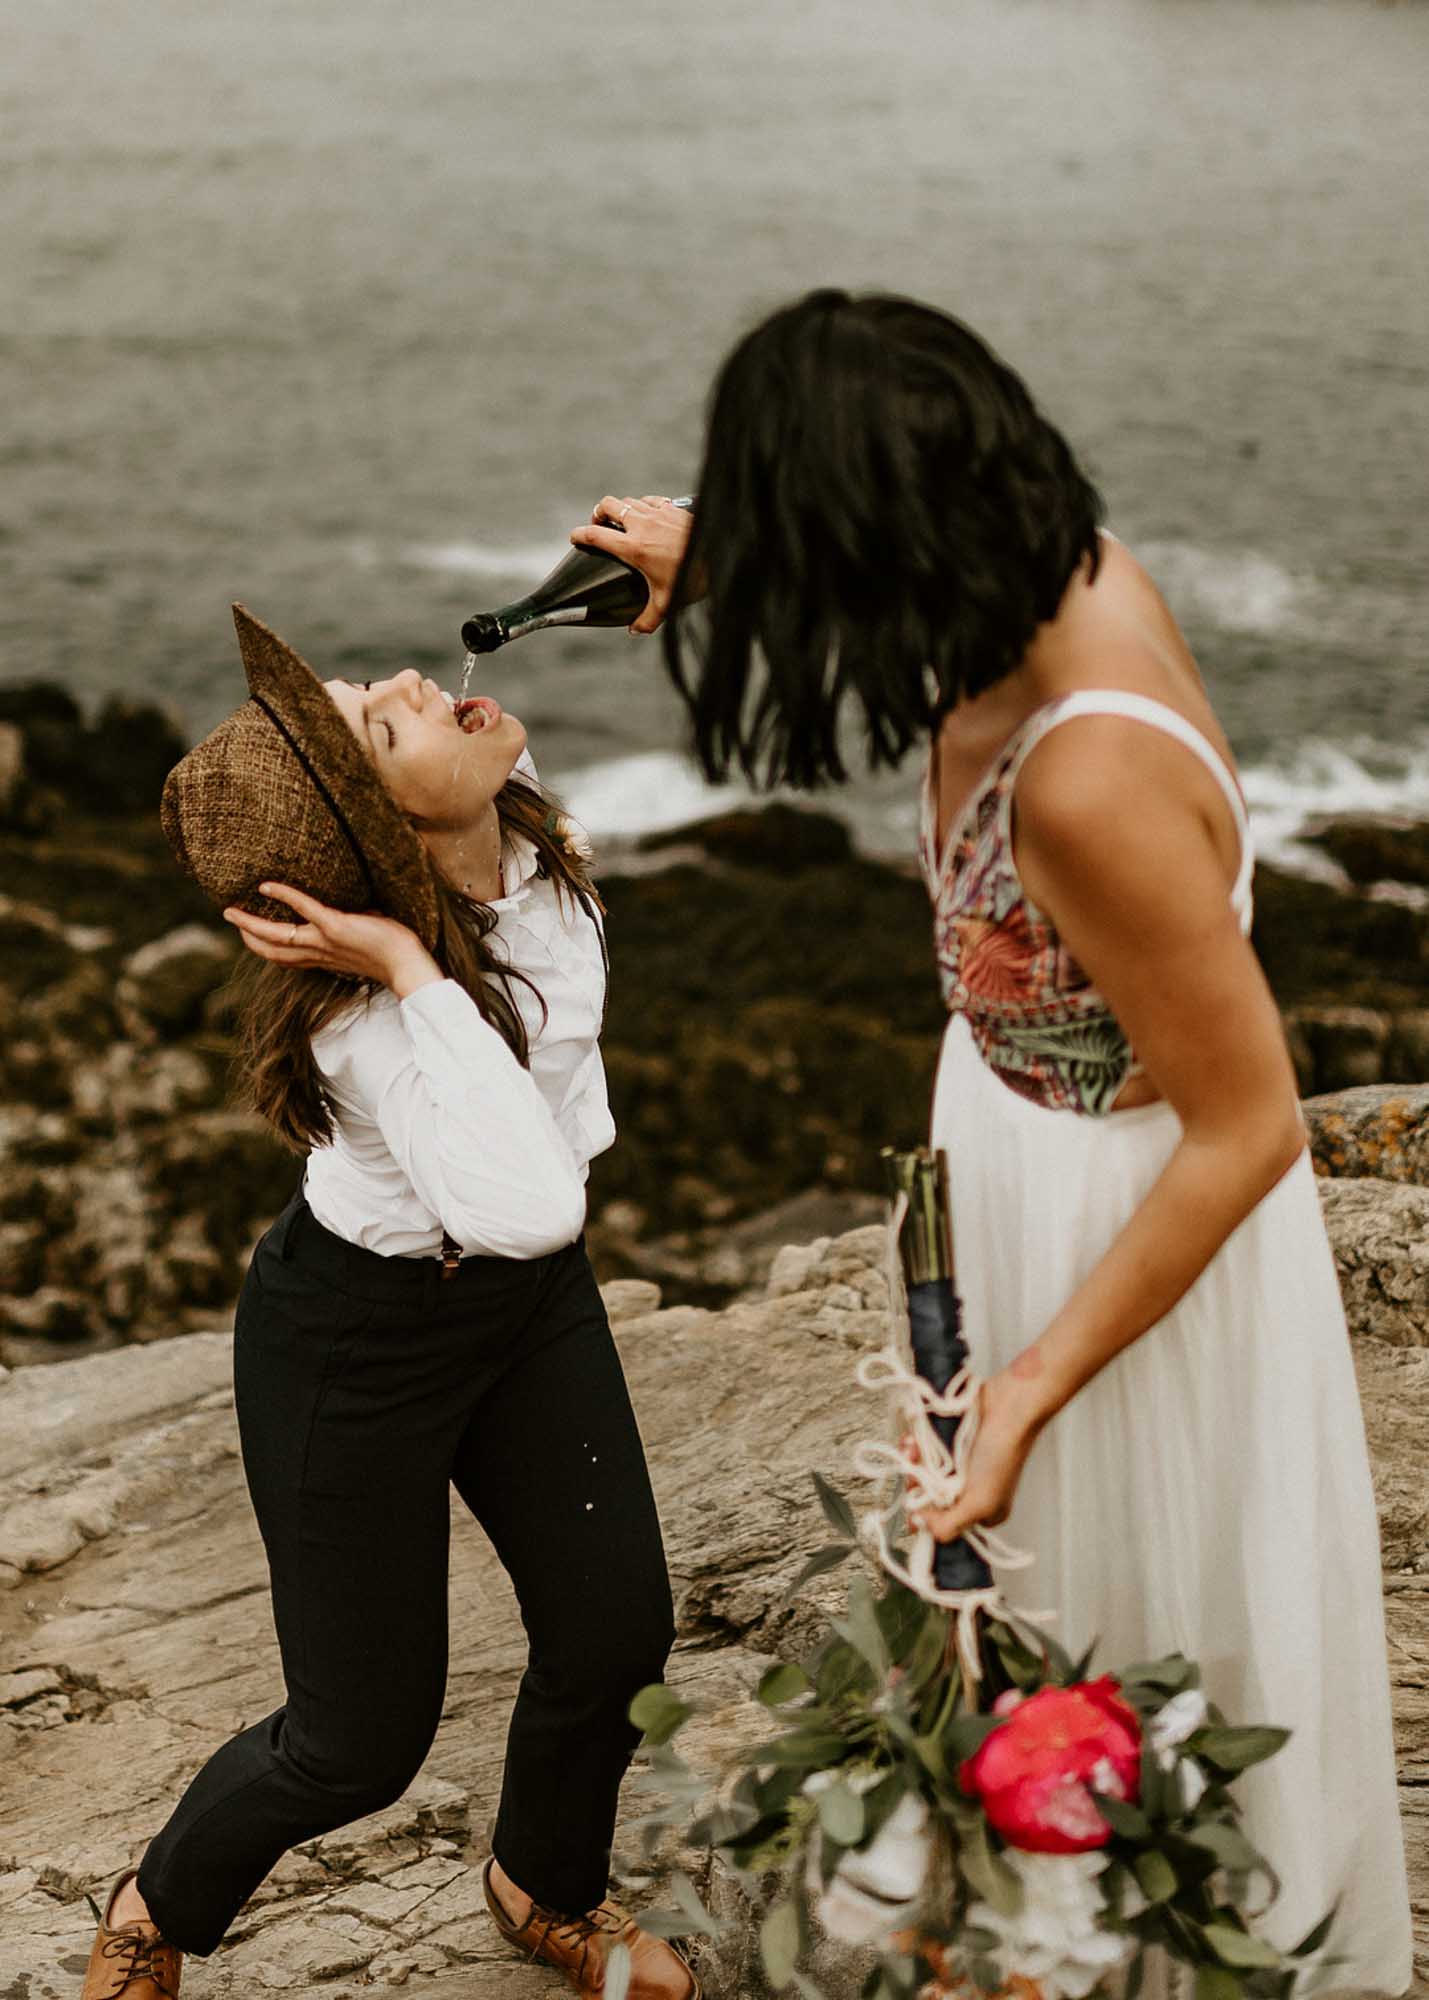 Romantic bohemian picnic photo session on the coast of Maine | Allie Kelley Photography | Featured on Equally Wed, the leading LGBTQ+ wedding magazine